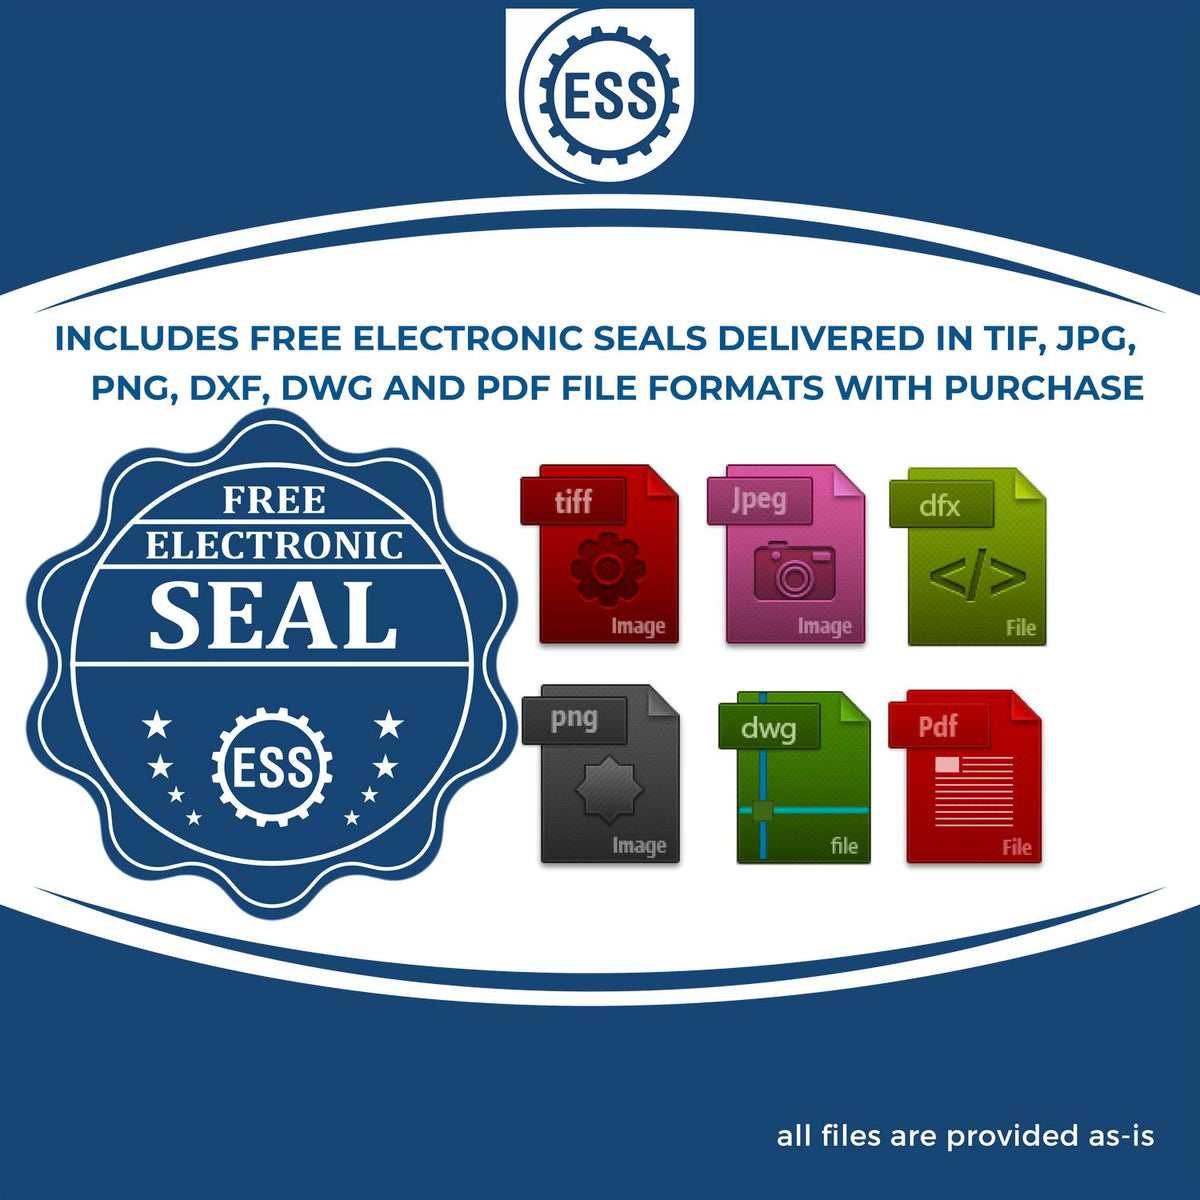 An infographic for the free electronic seal for the Hybrid Vermont Engineer Seal illustrating the different file type icons such as DXF, DWG, TIF, JPG and PNG.